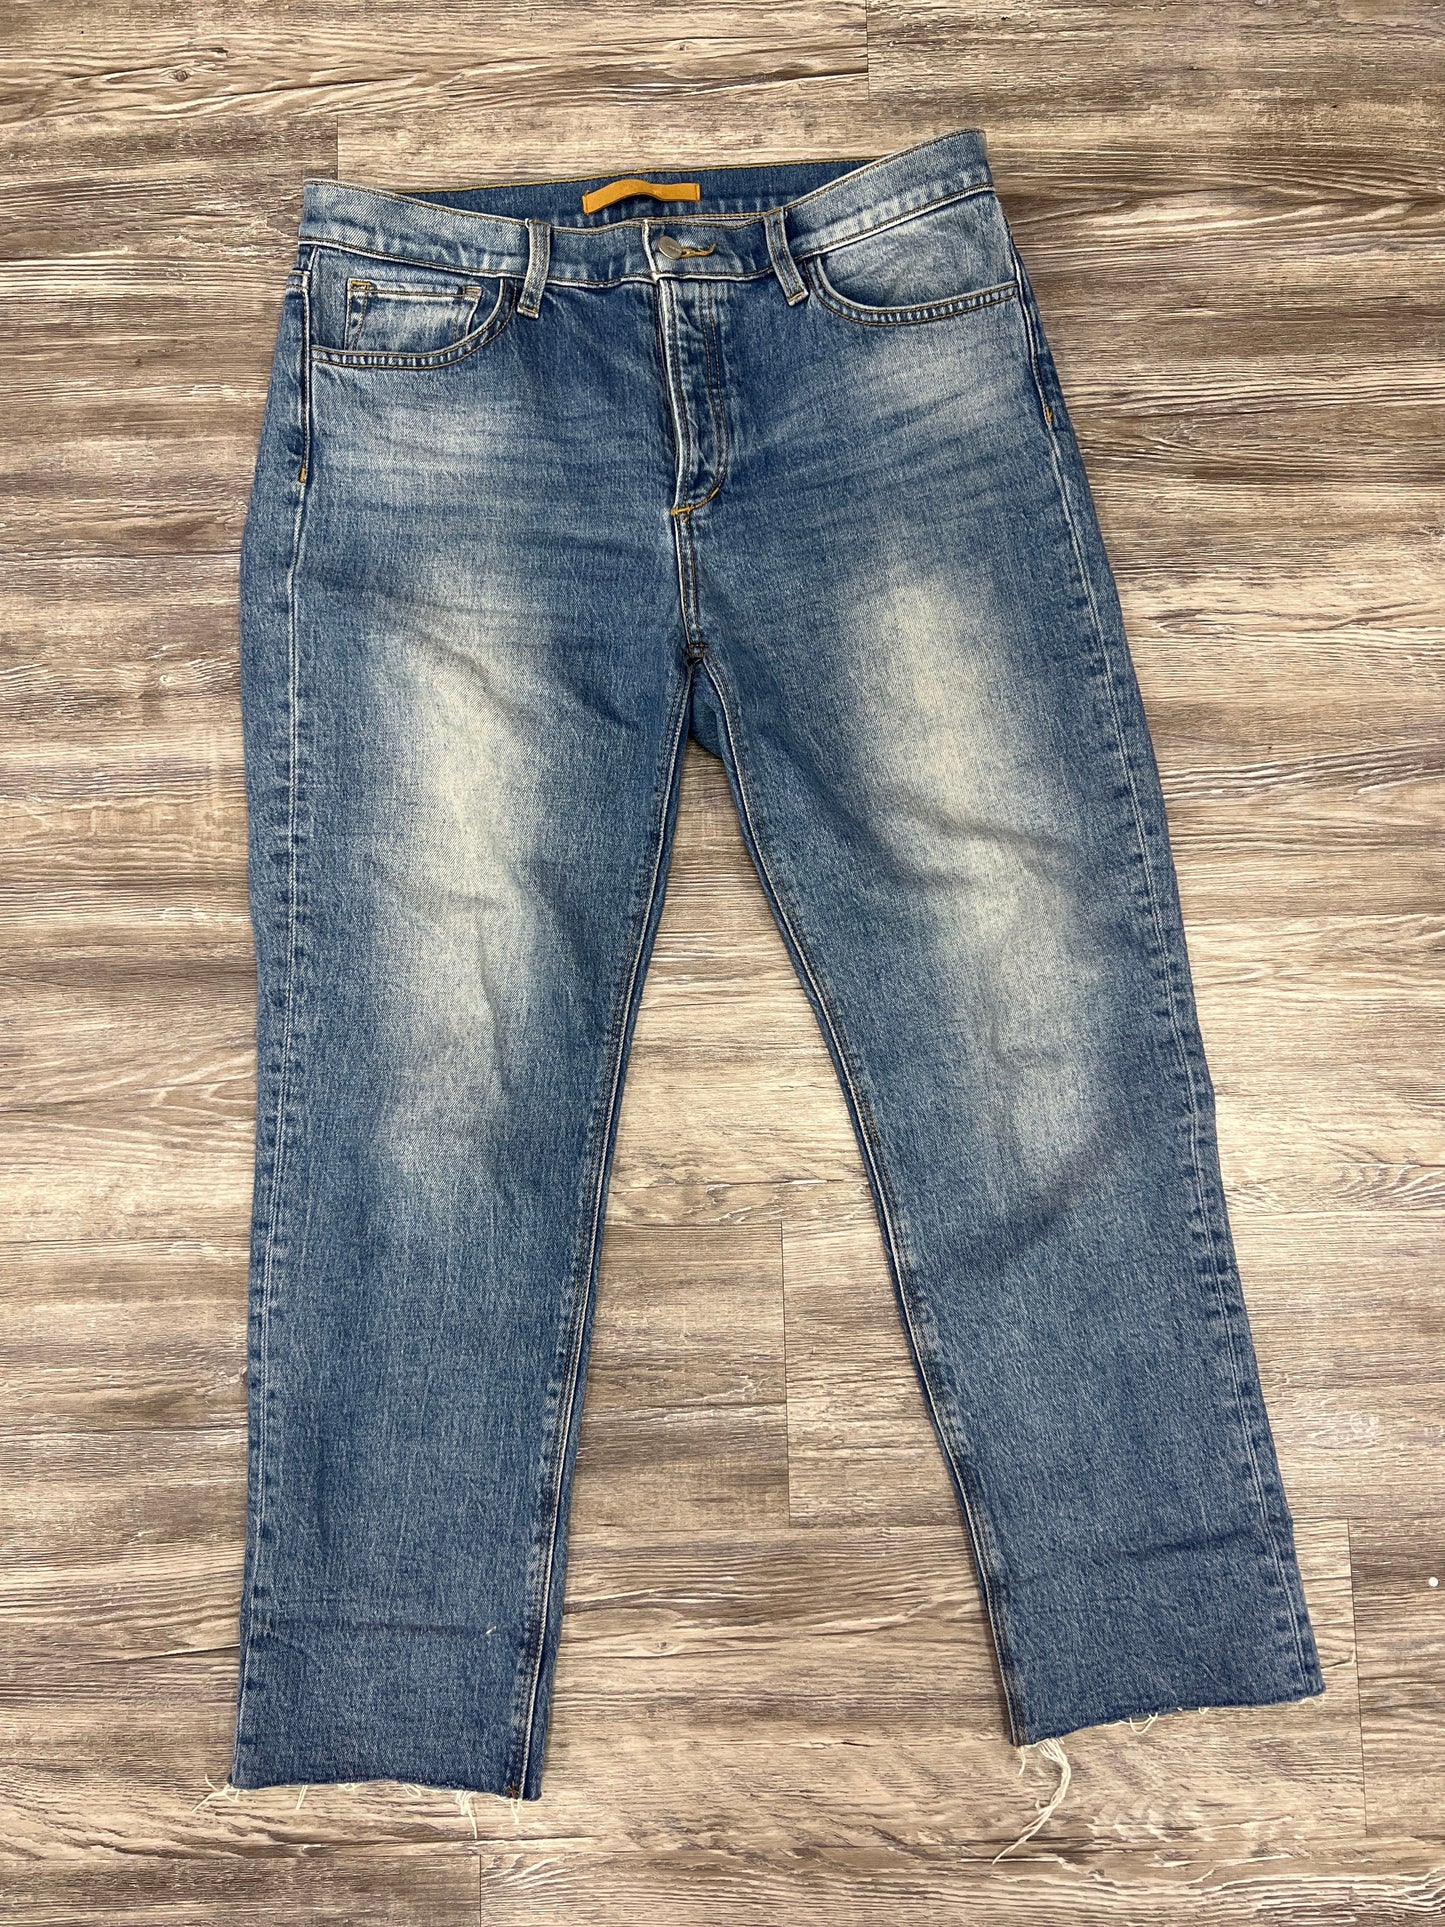 Jeans Designer By Joes Jeans Size: 10